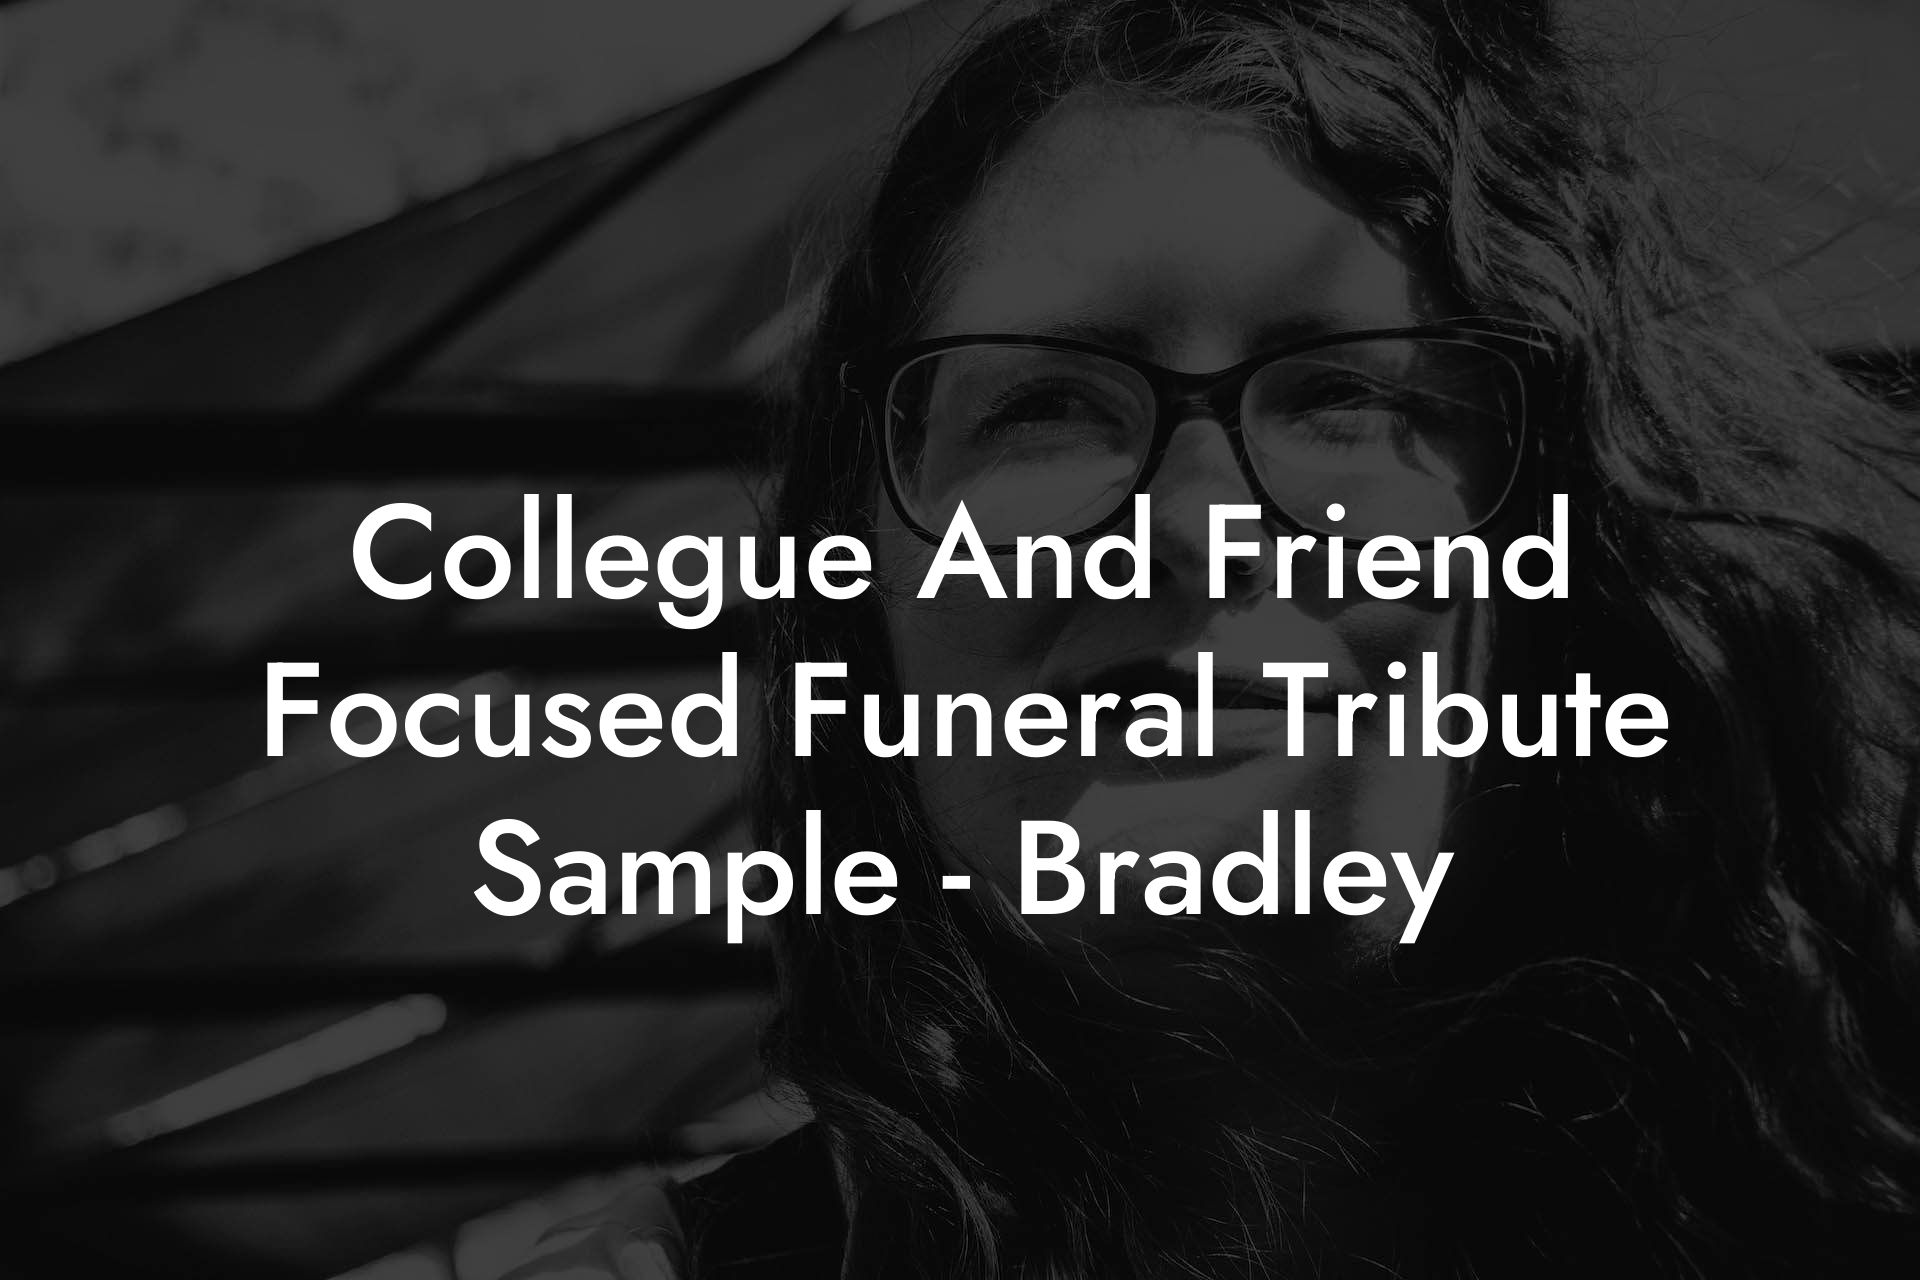 Collegue And Friend Focused Funeral Tribute Sample - Bradley